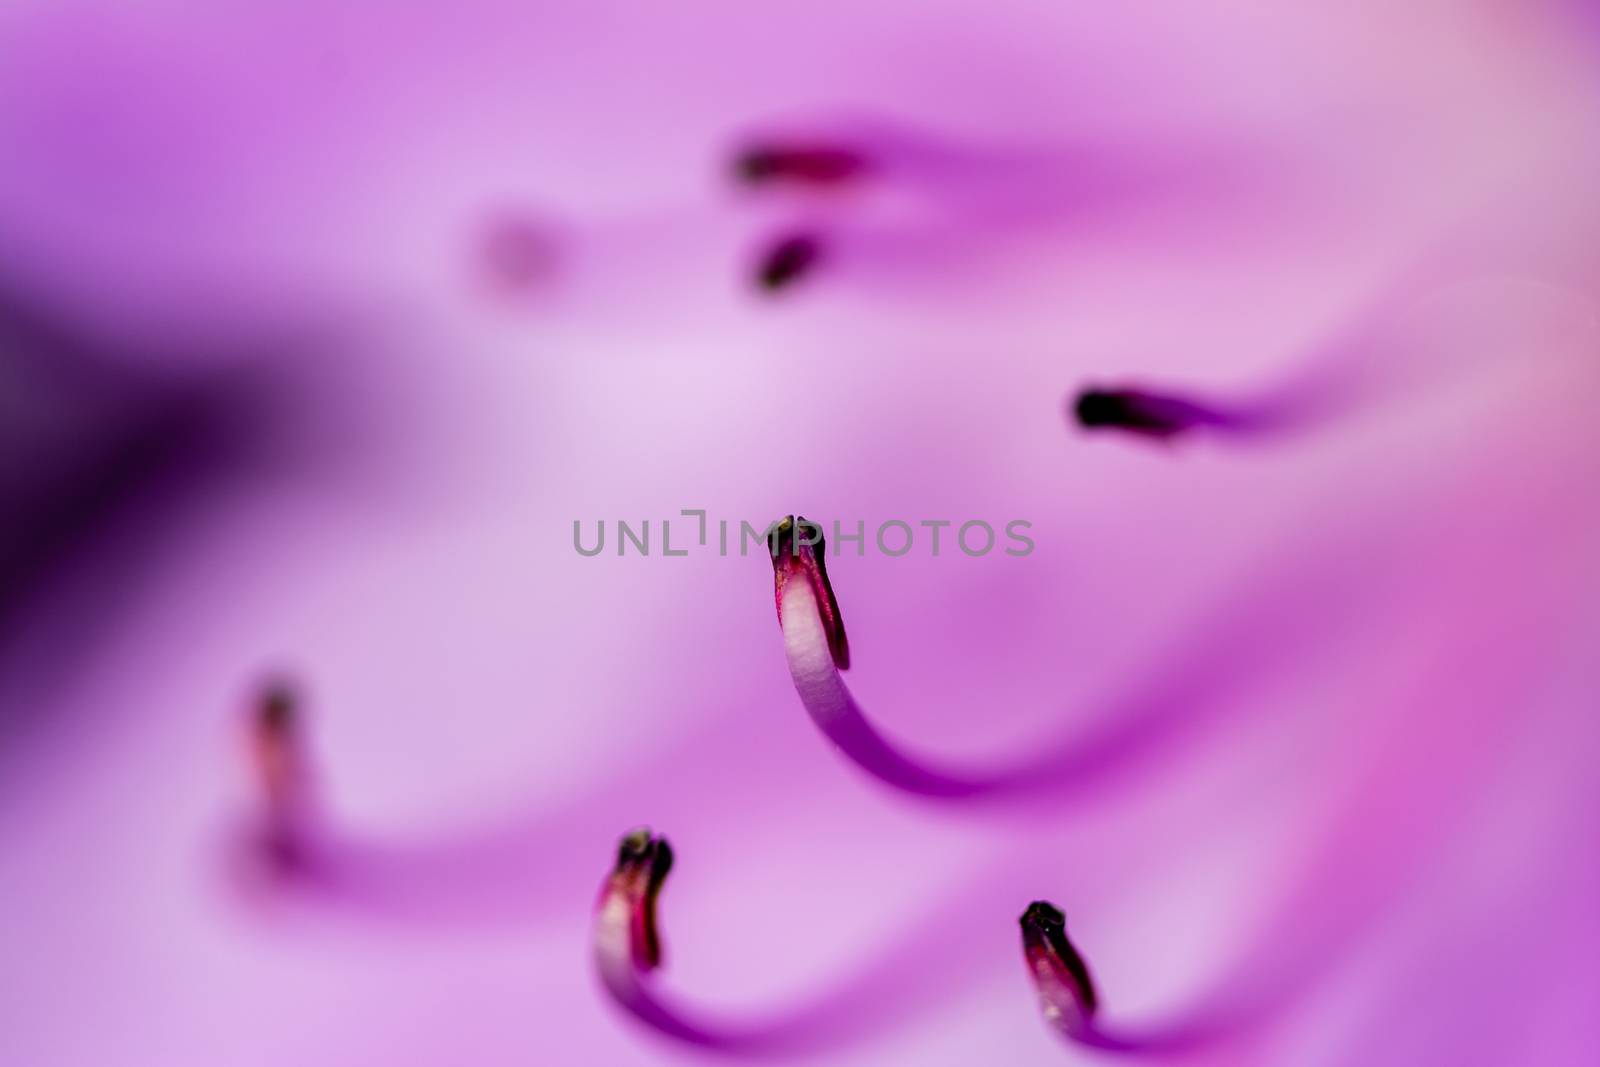 A close up shot of the stamens on a pink flower.